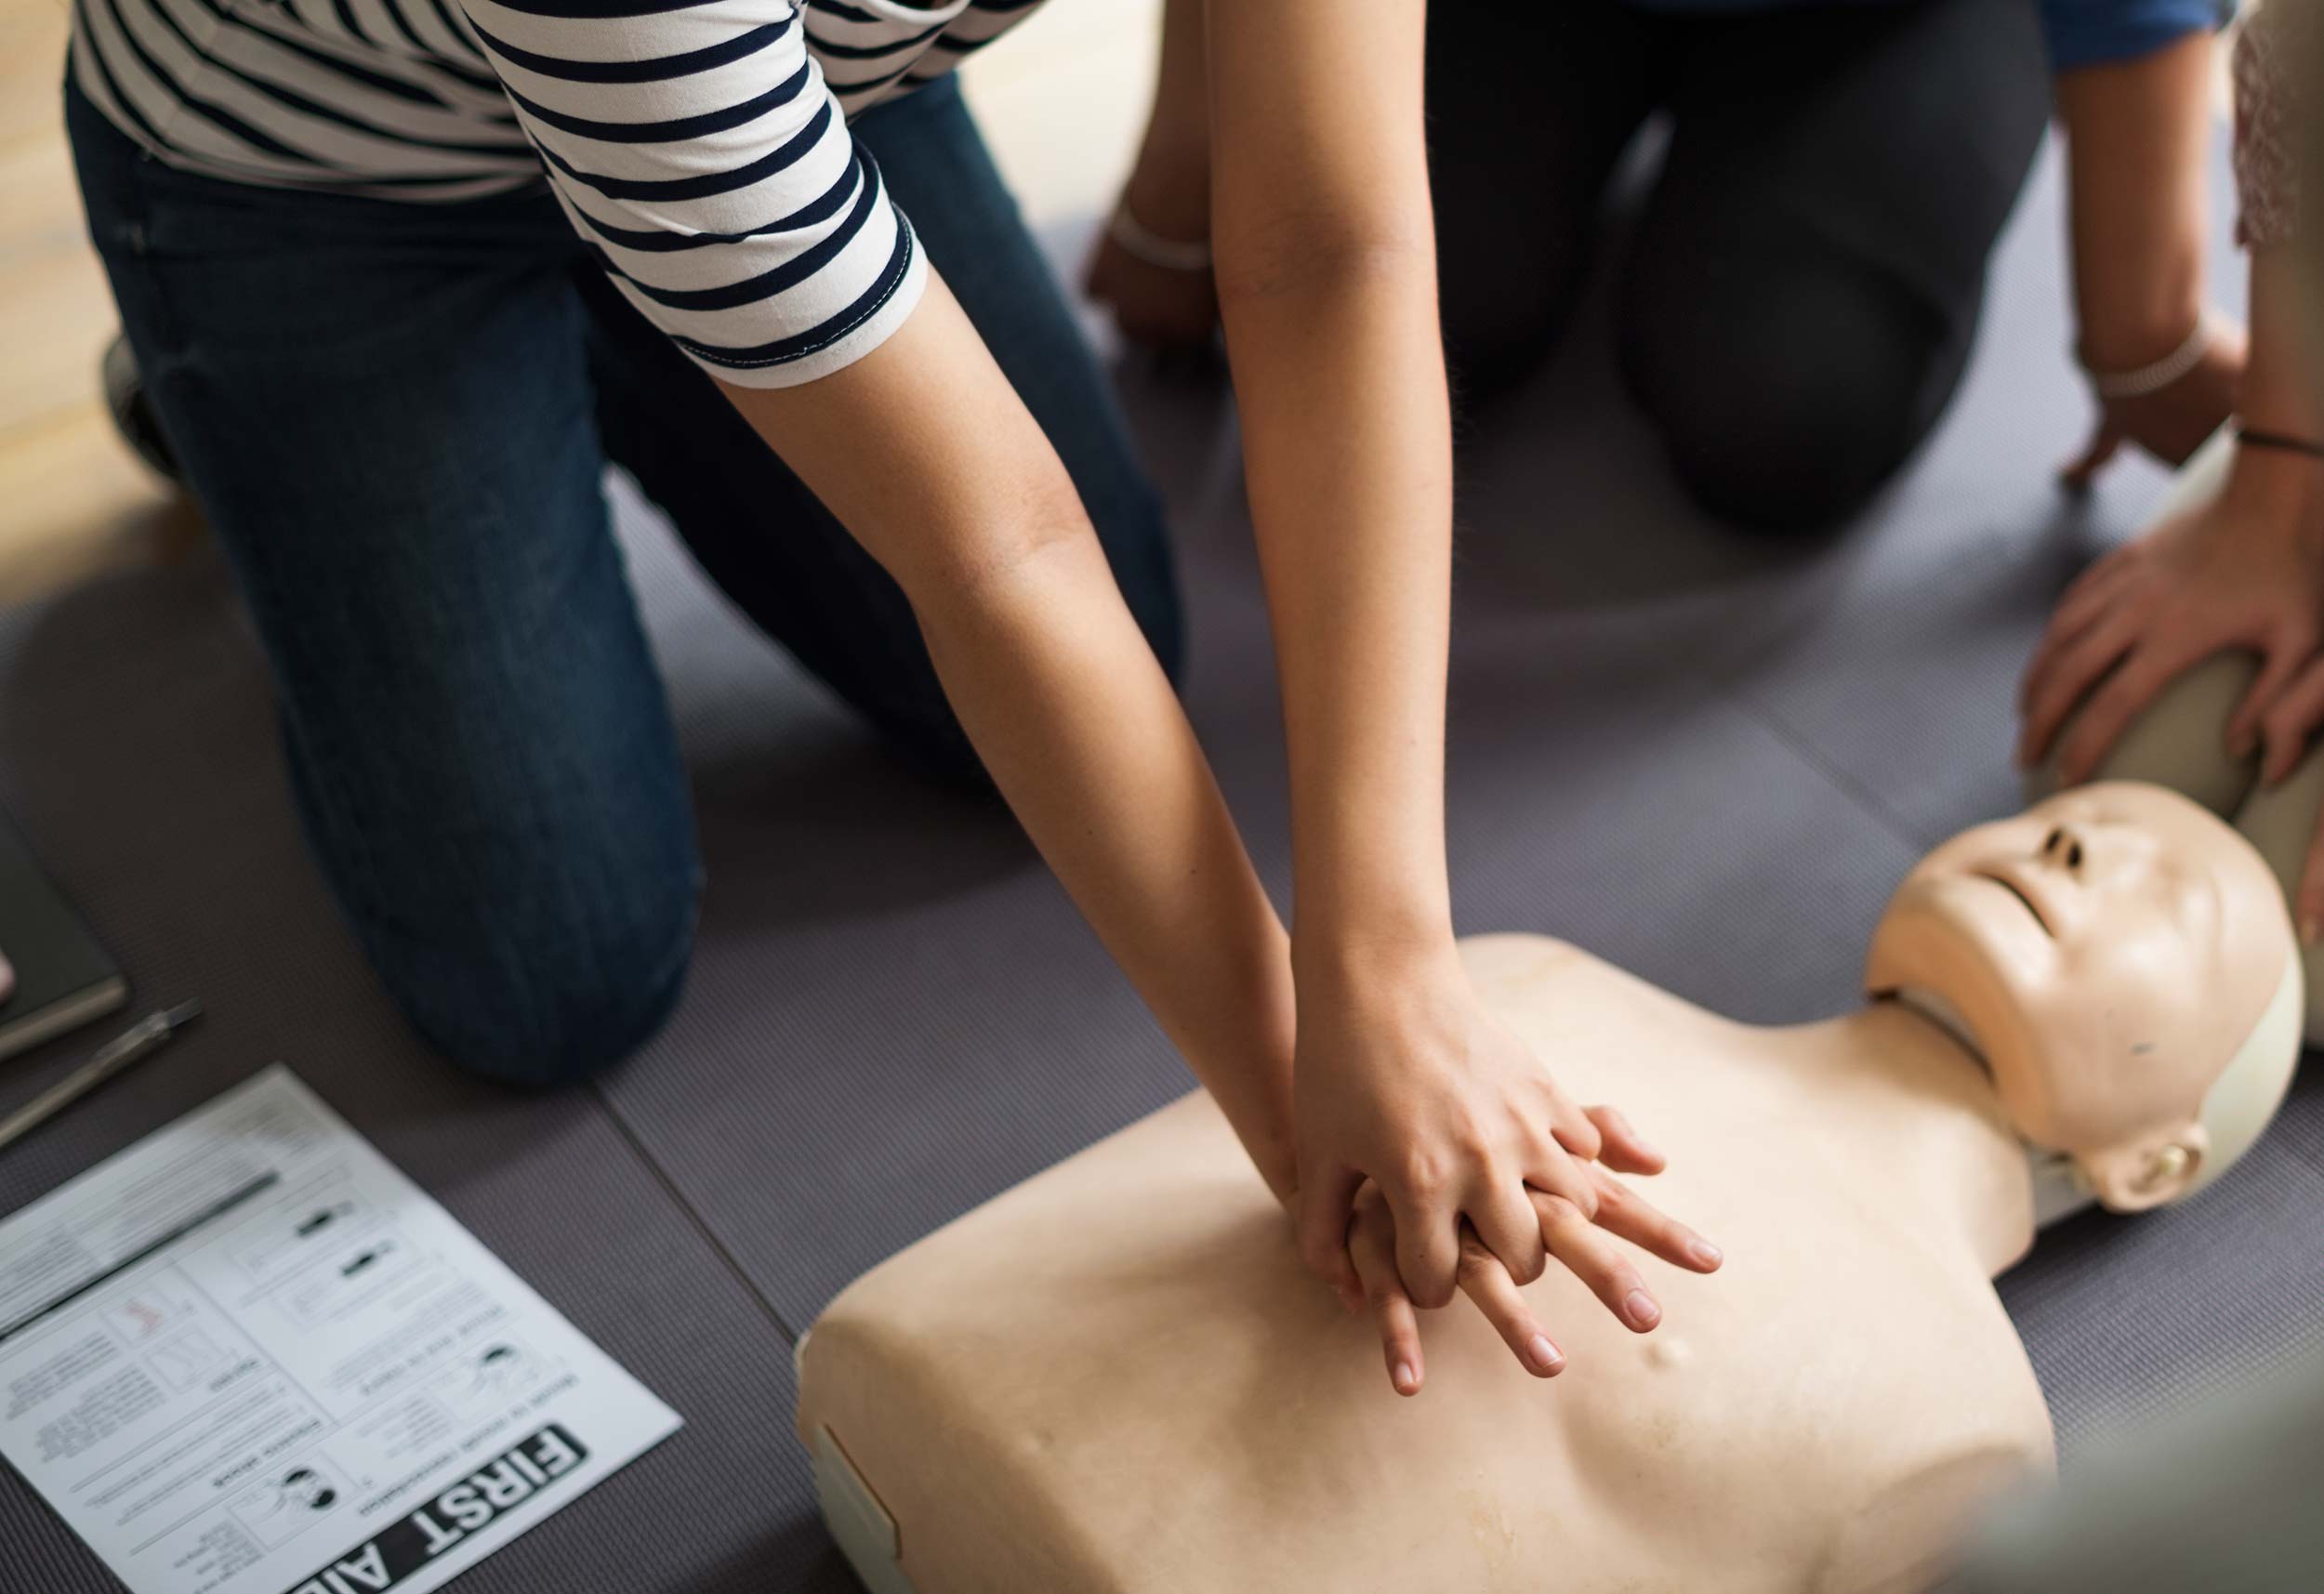 Everything You Need to Know About Heart Attack First Aid